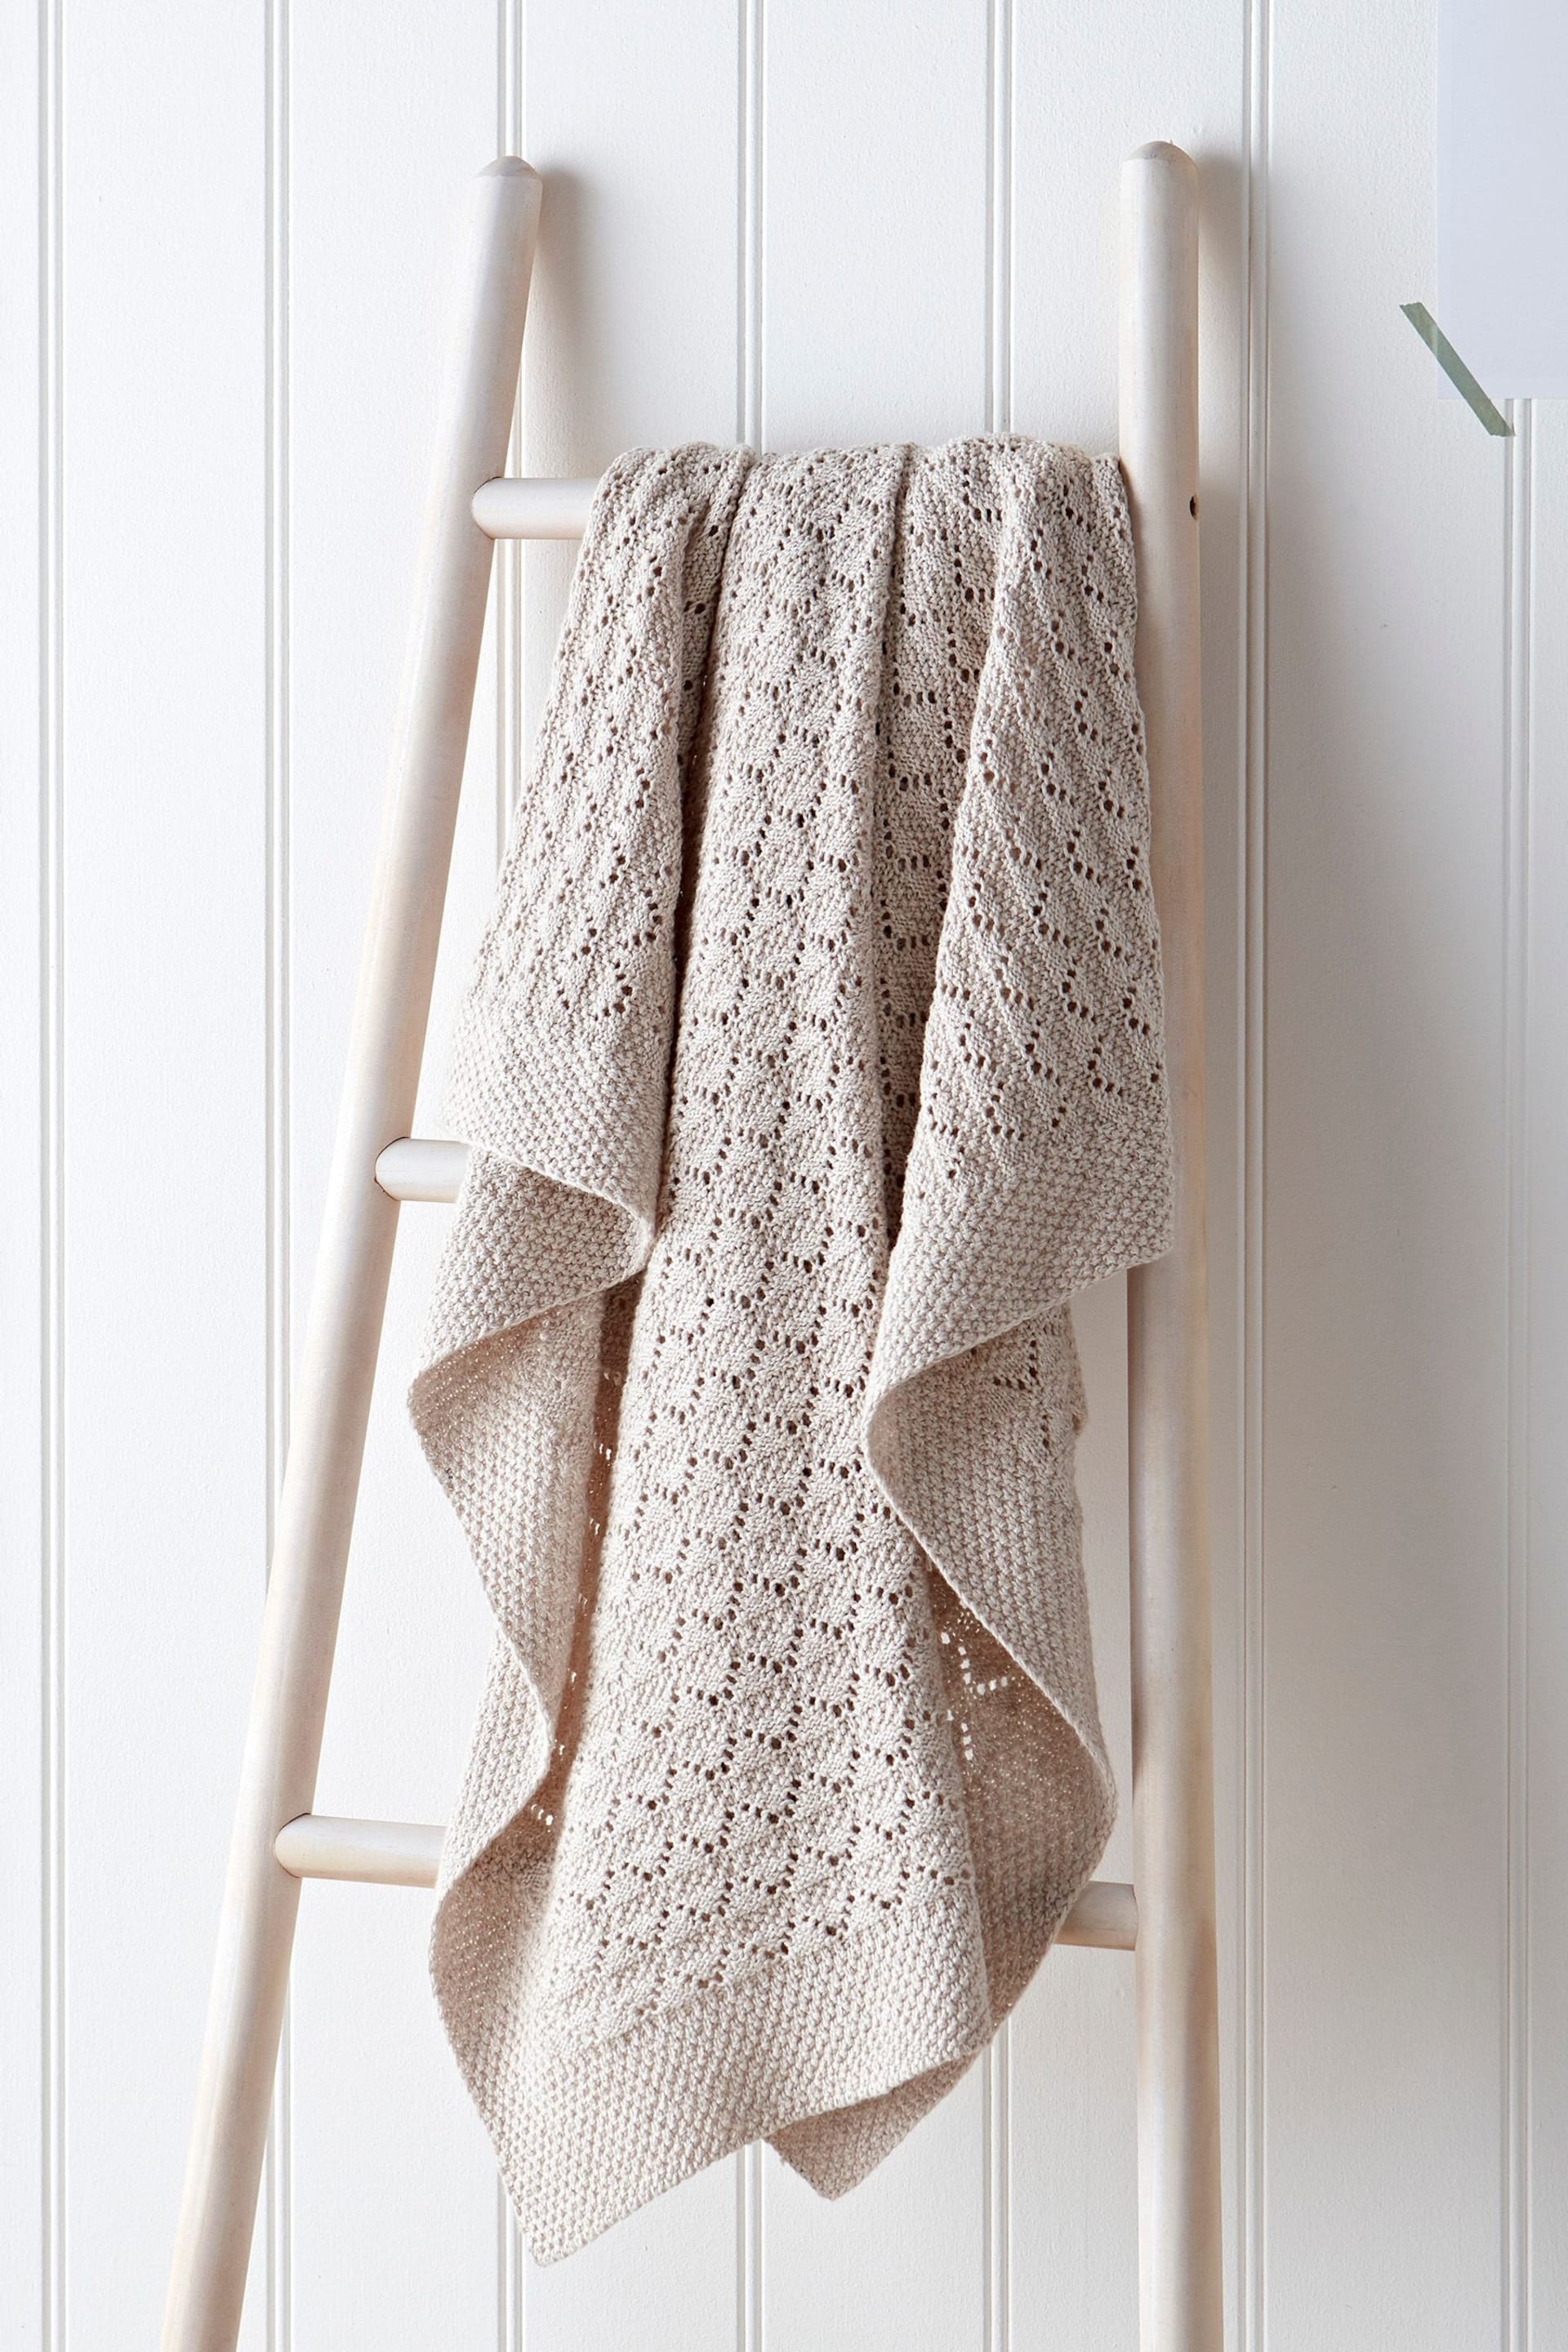 The White Company Natural Heirloom Natural Blanket - Image 1 of 2